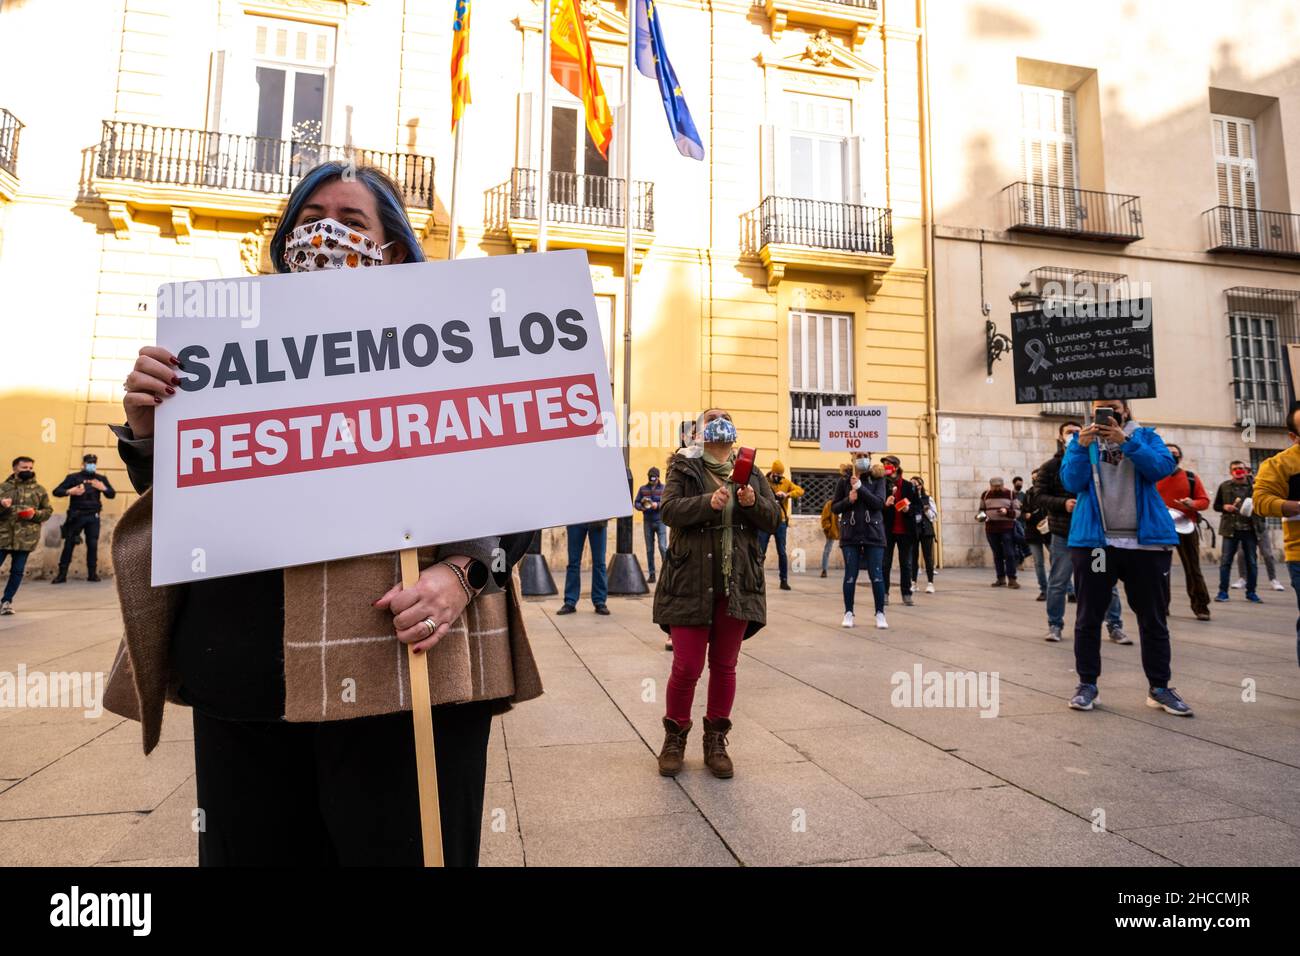 Valencia, Spain; January 21, 2021: Demonstrators against the measures against Covid taken against the hospitality sector by the local government. Stock Photo